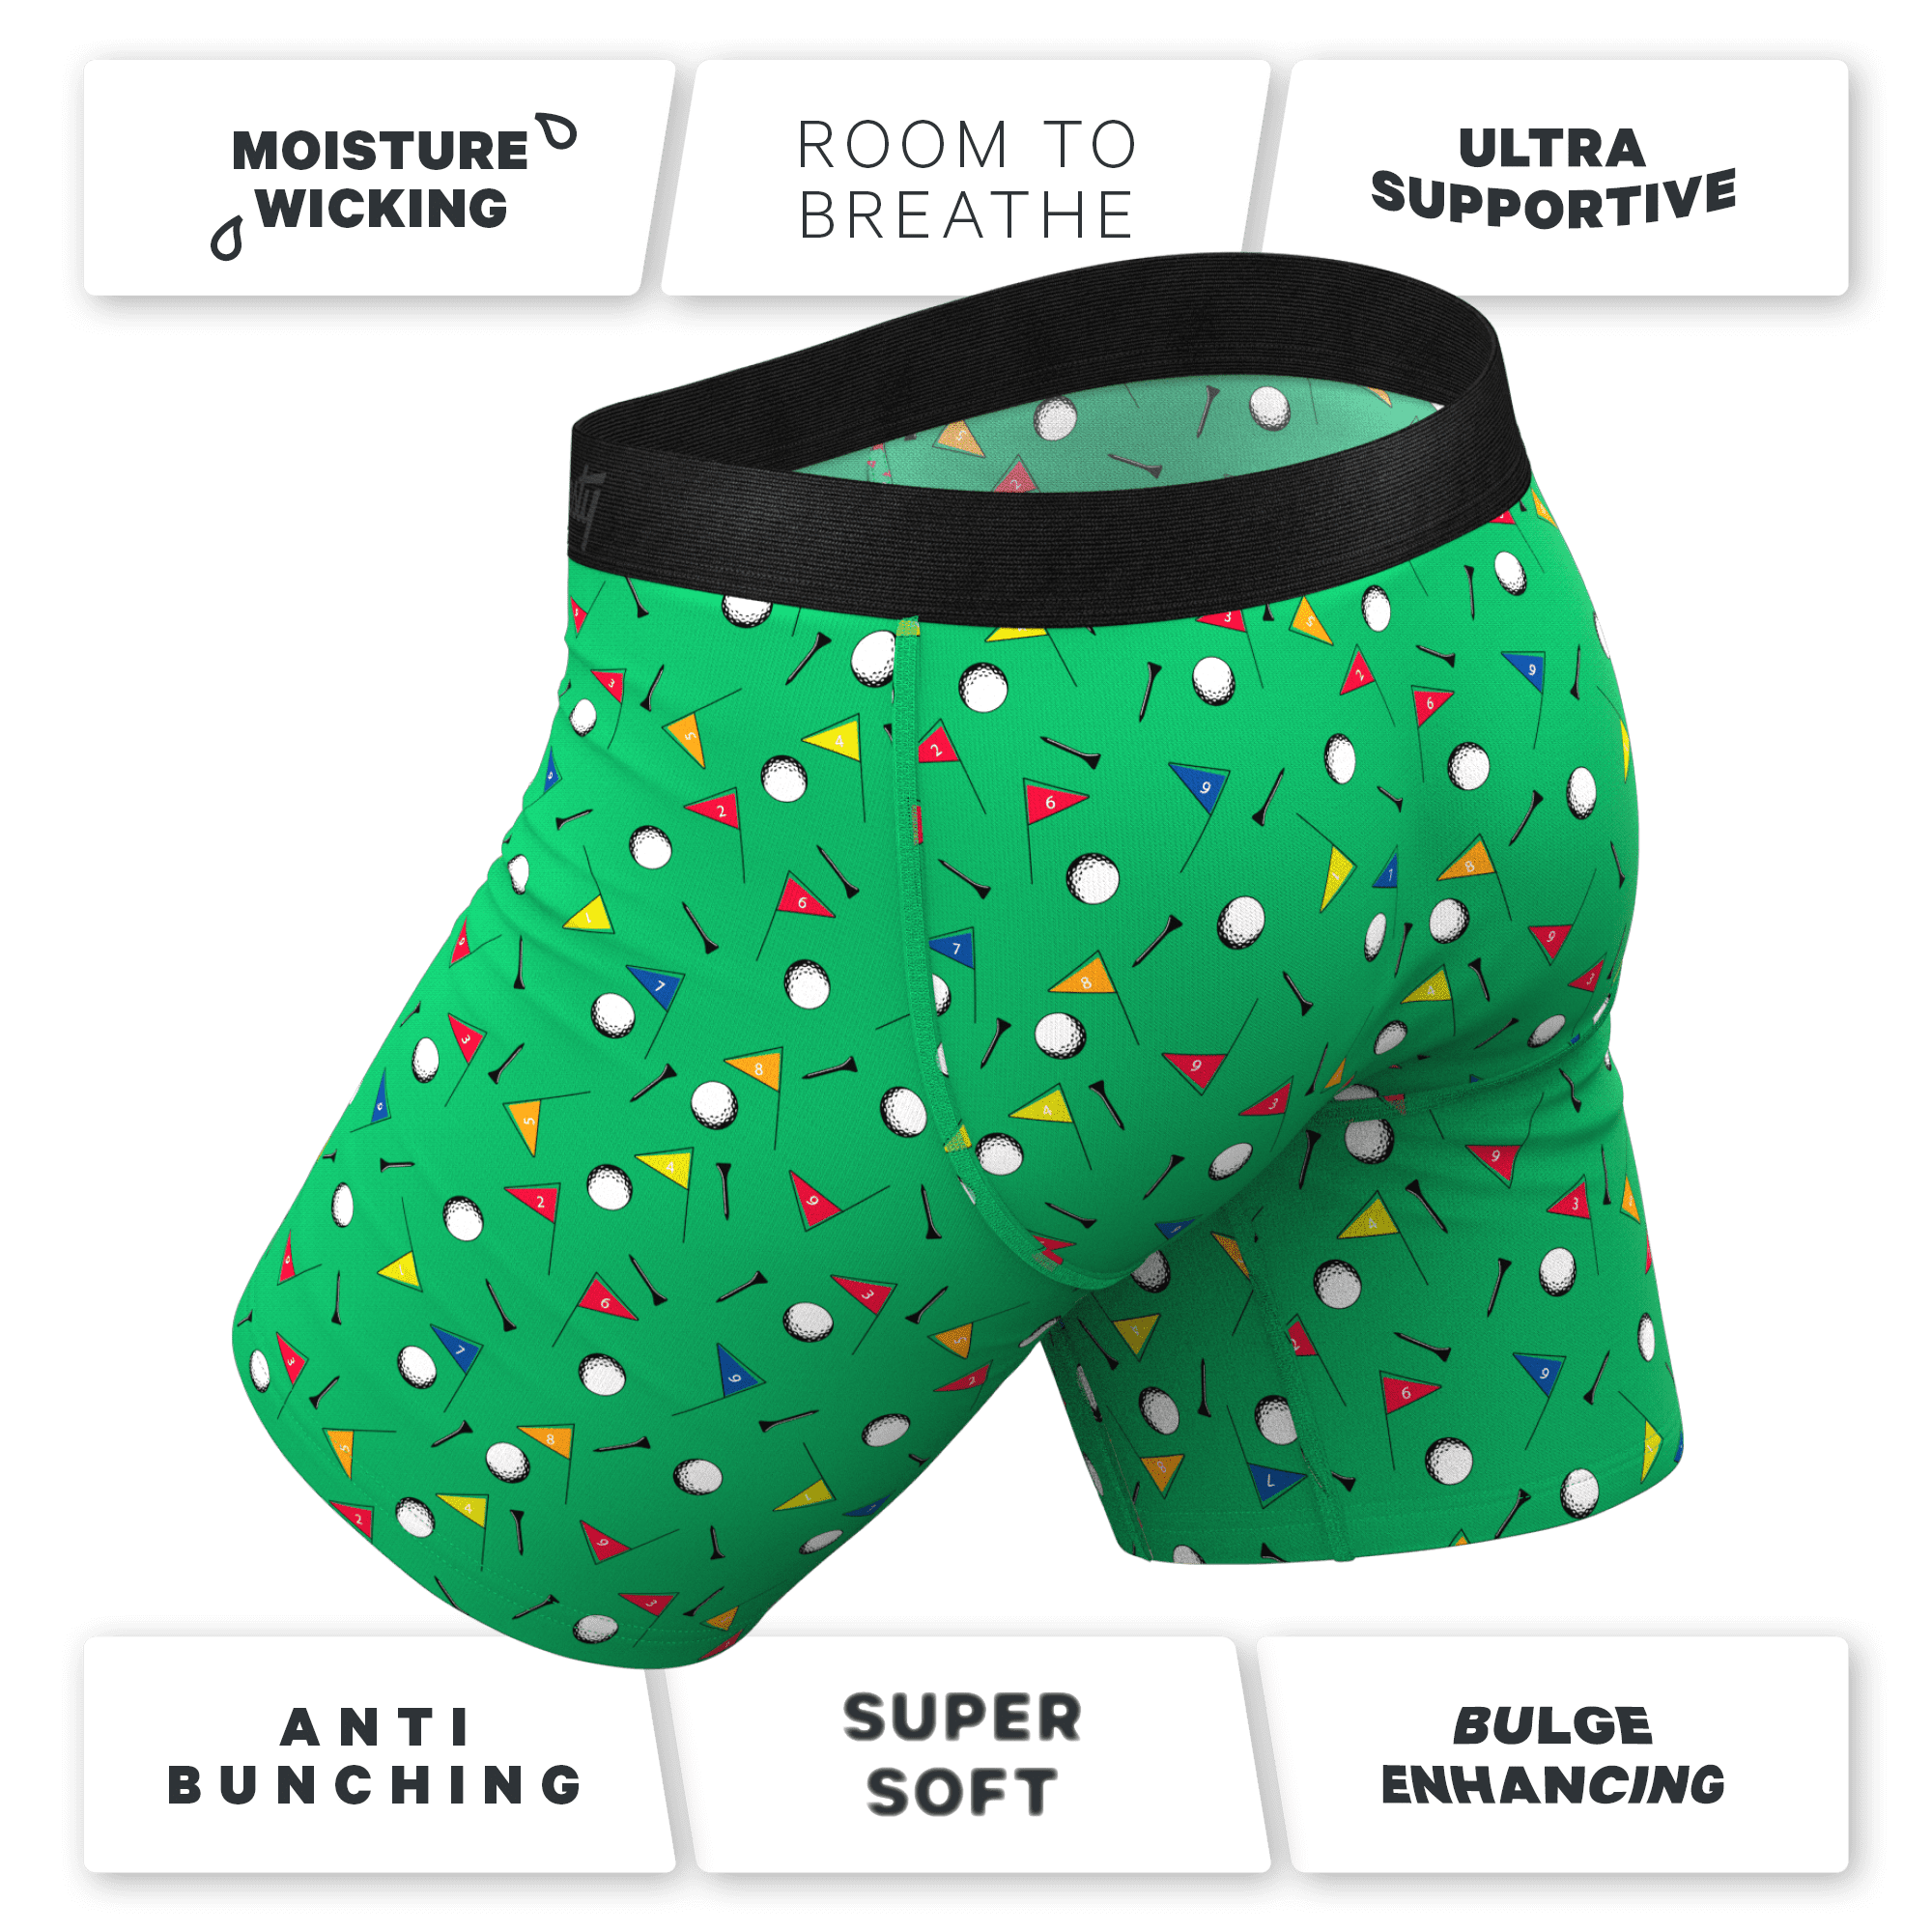 The Front Nine - Shinesty Golf Ball Hammock Pouch Underwear With Fly XL